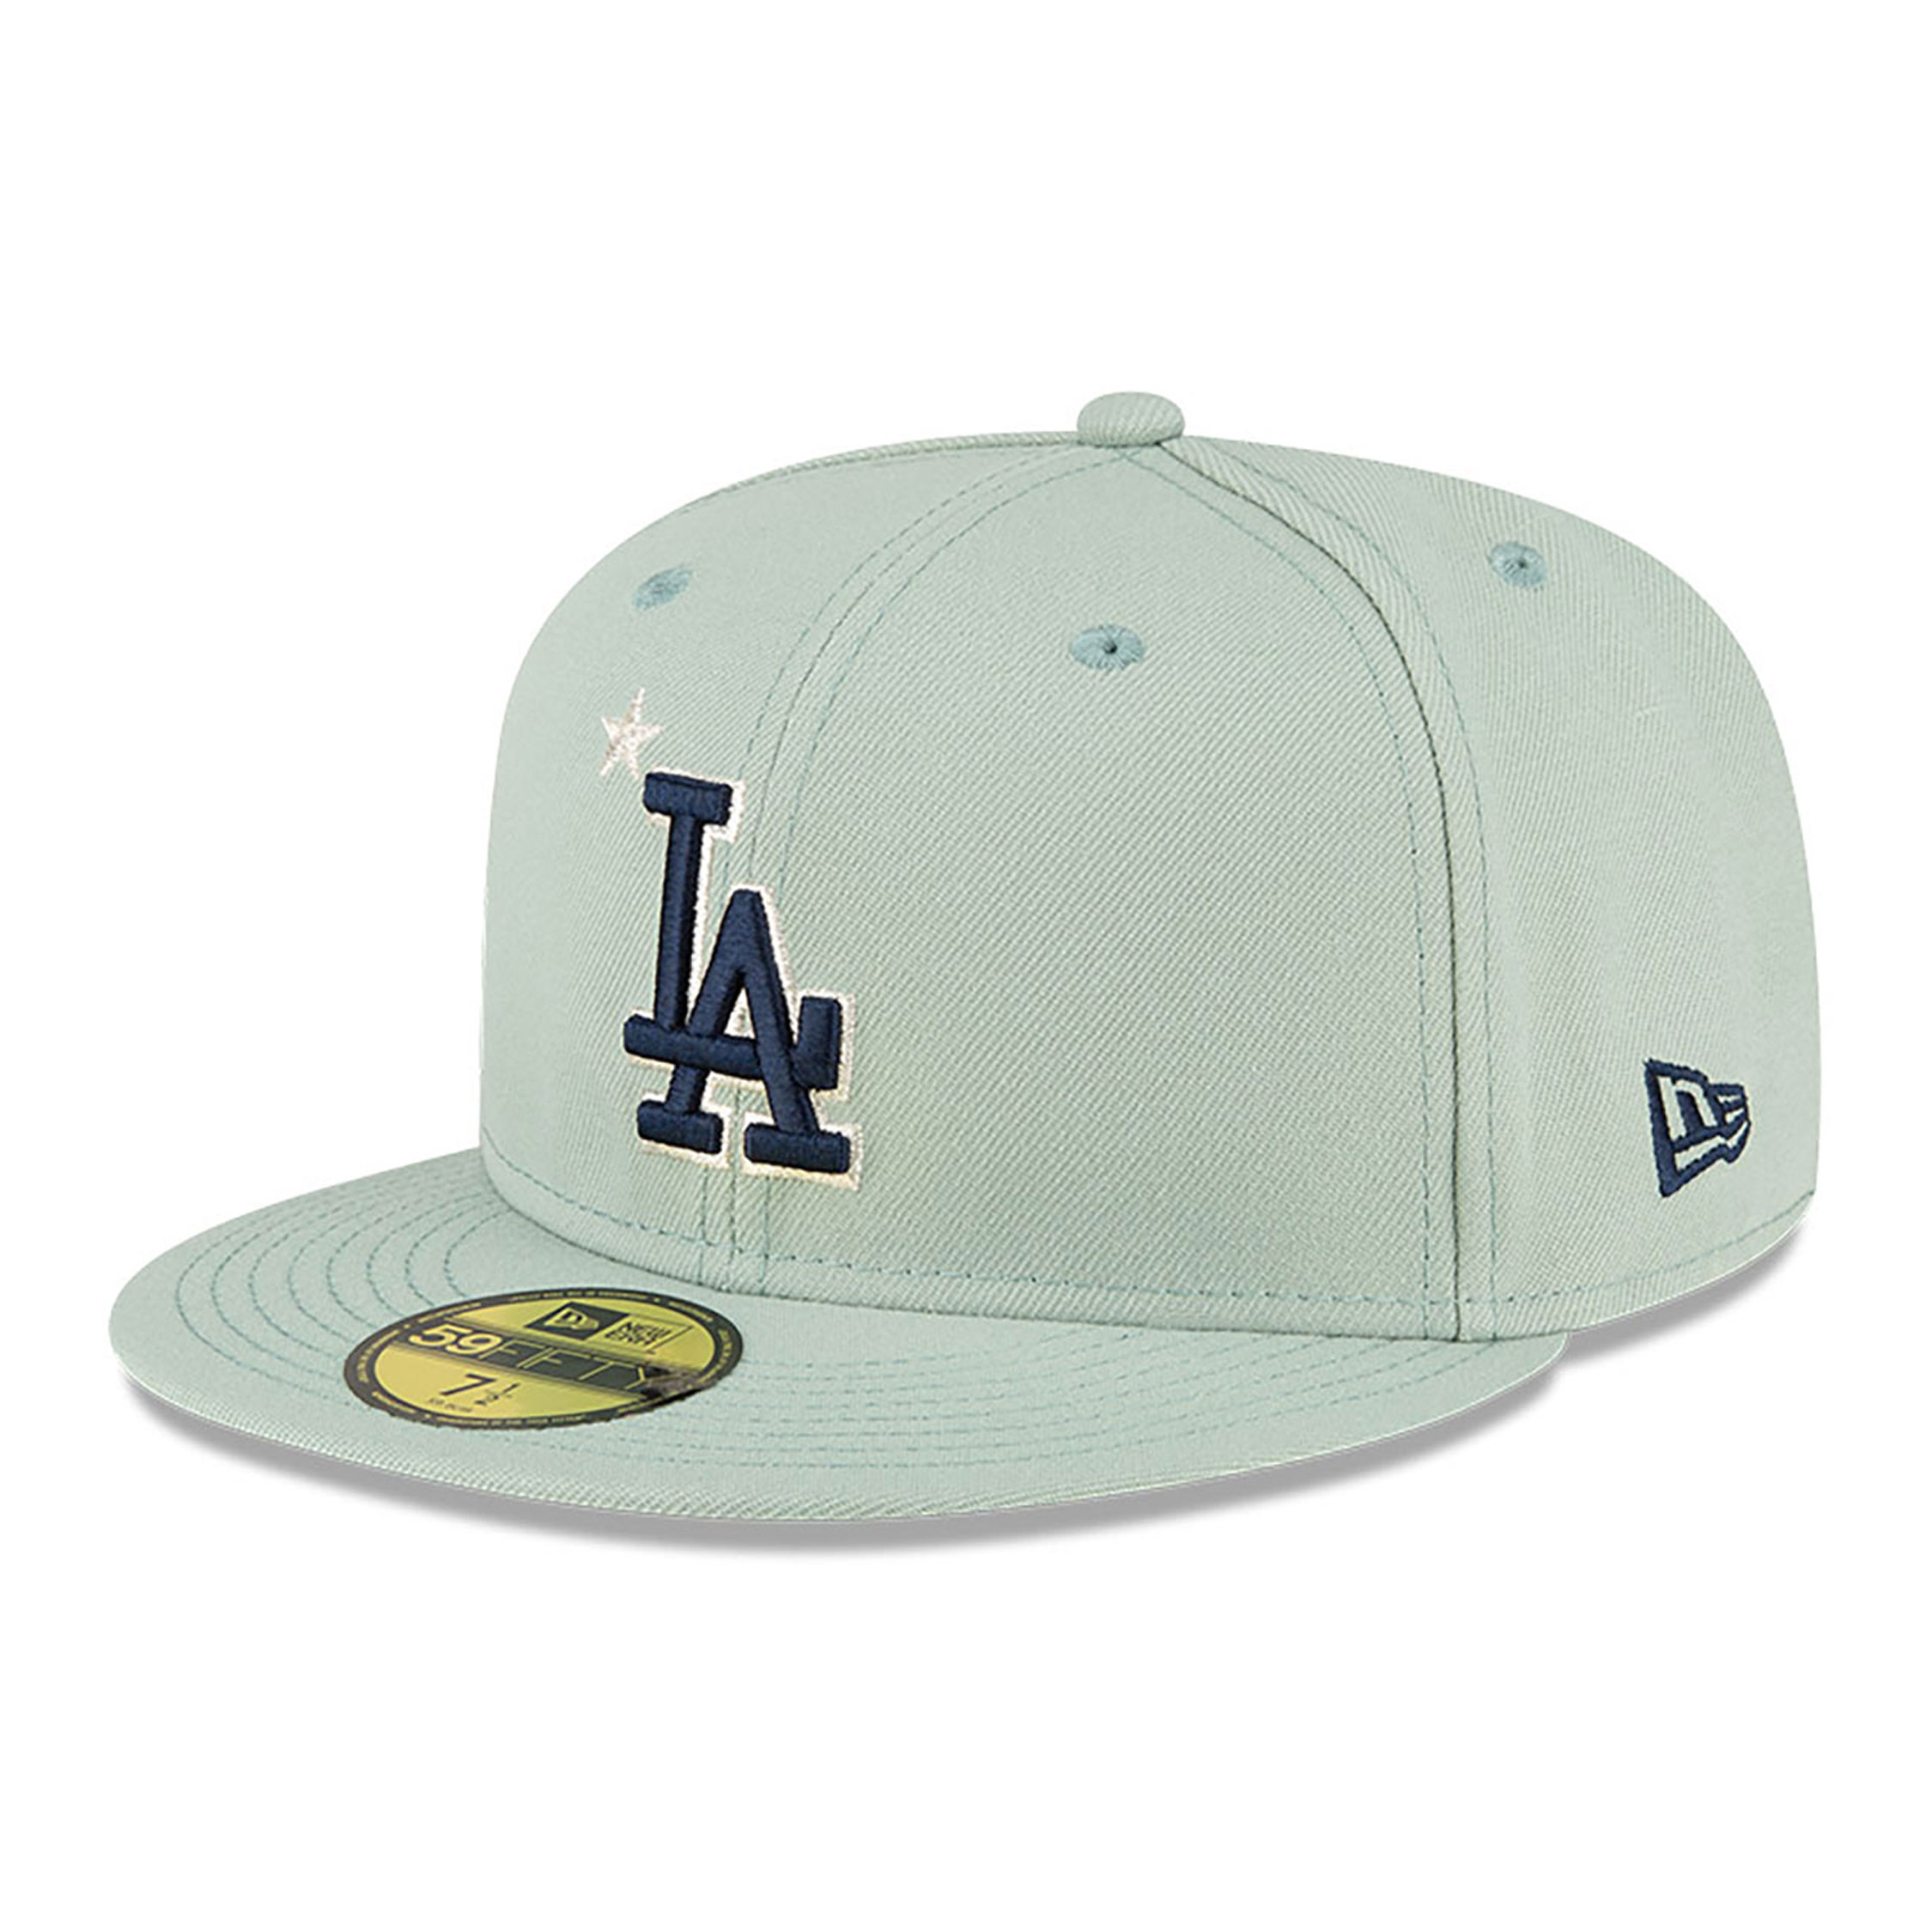 LA Dodgers MLB All Star Game Pastel Green 59FIFTY Fitted Cap